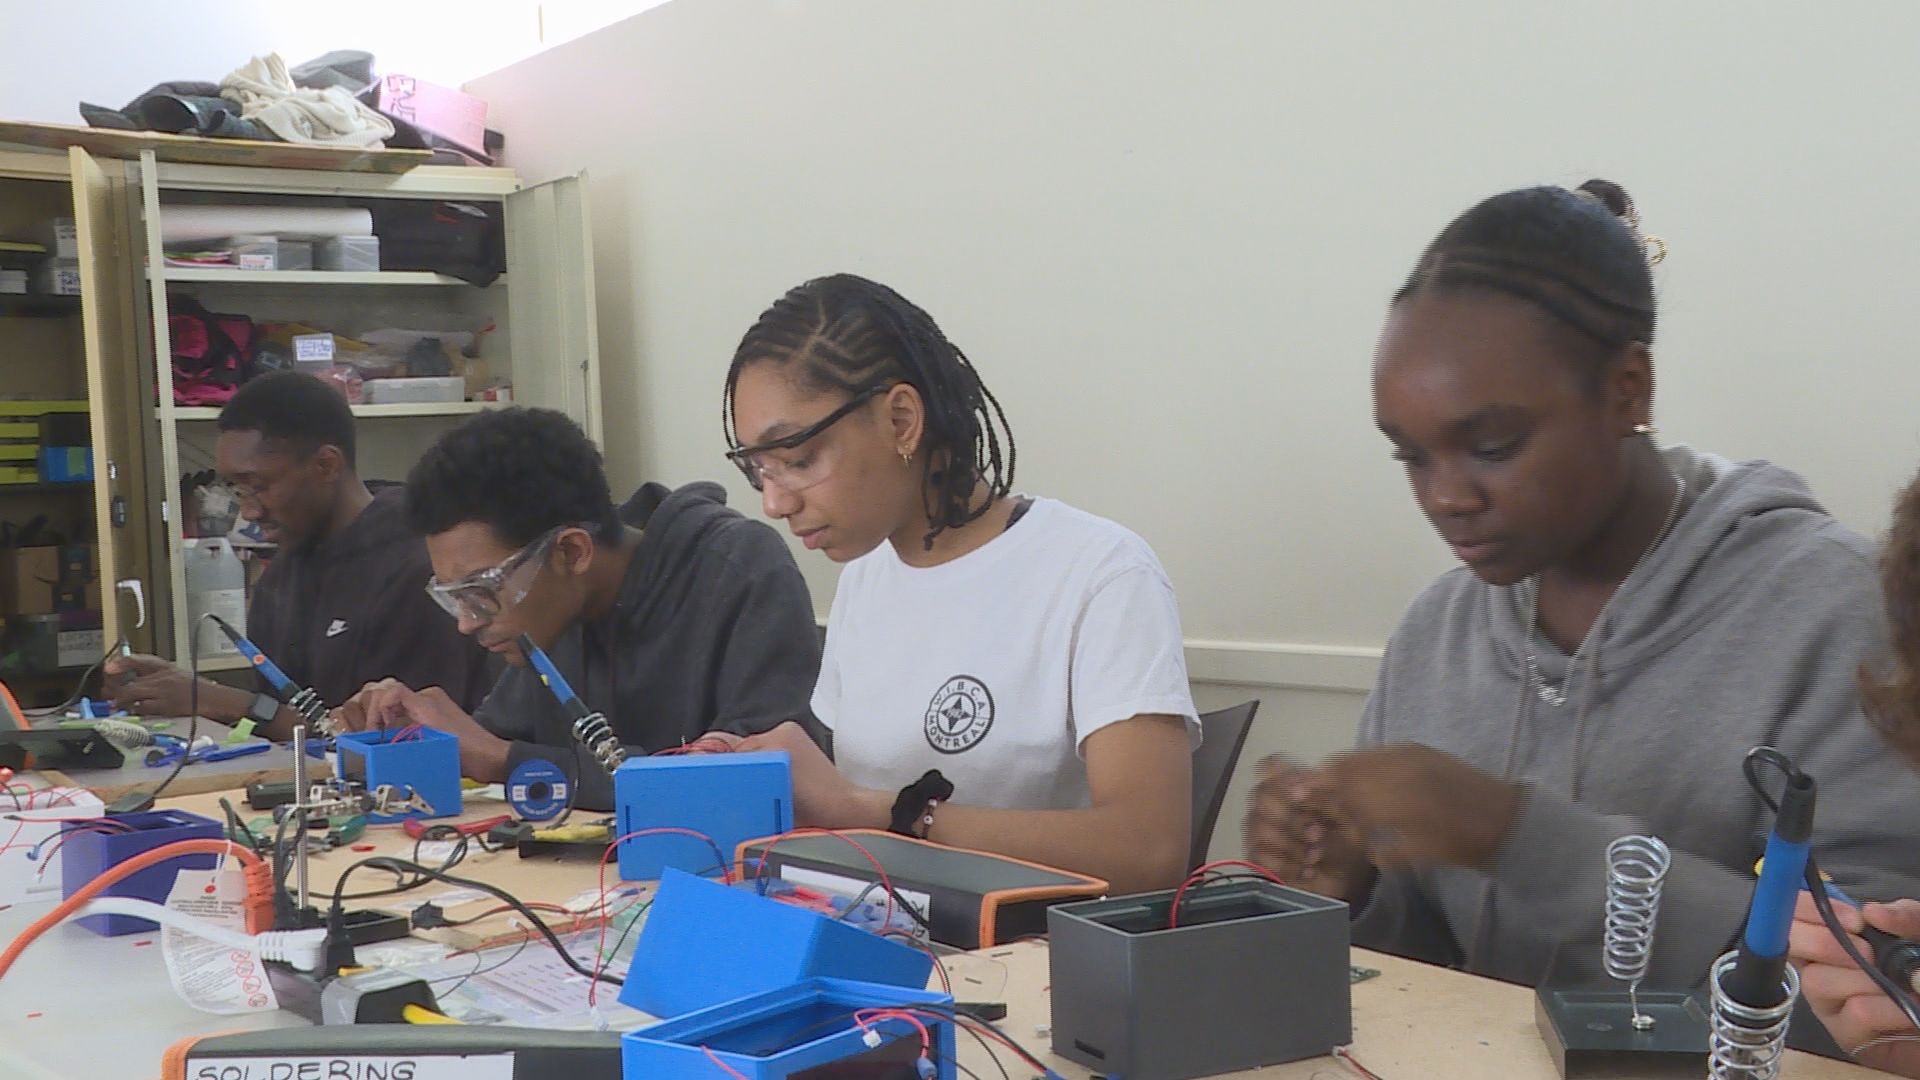 Award-winning robotics club in Montreal is growing and has hopes for a new home